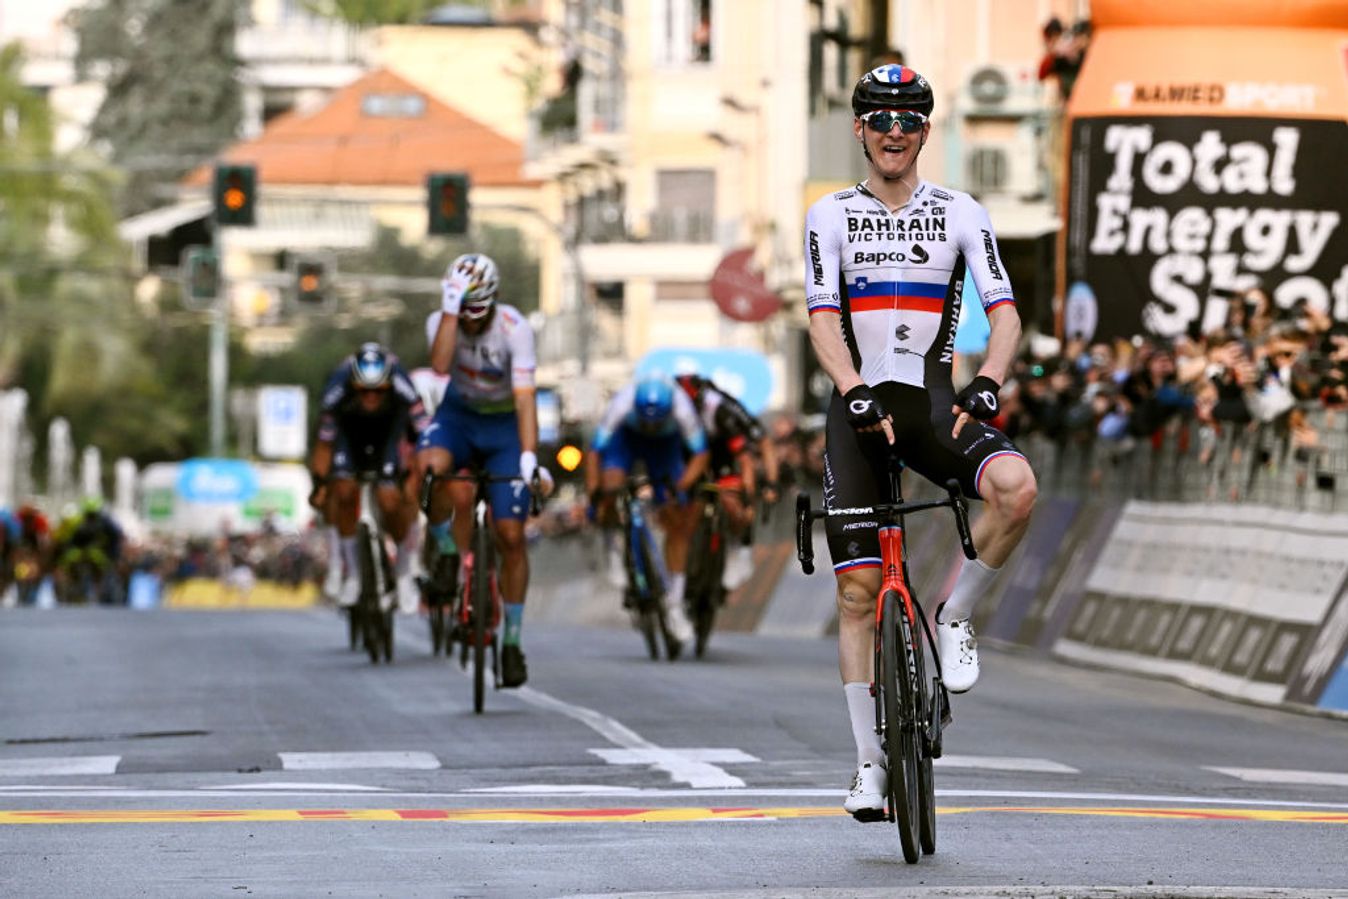 Matej Mohorič won Milan-San Remo in 2022 after using a dropper post for the descent of the Poggio